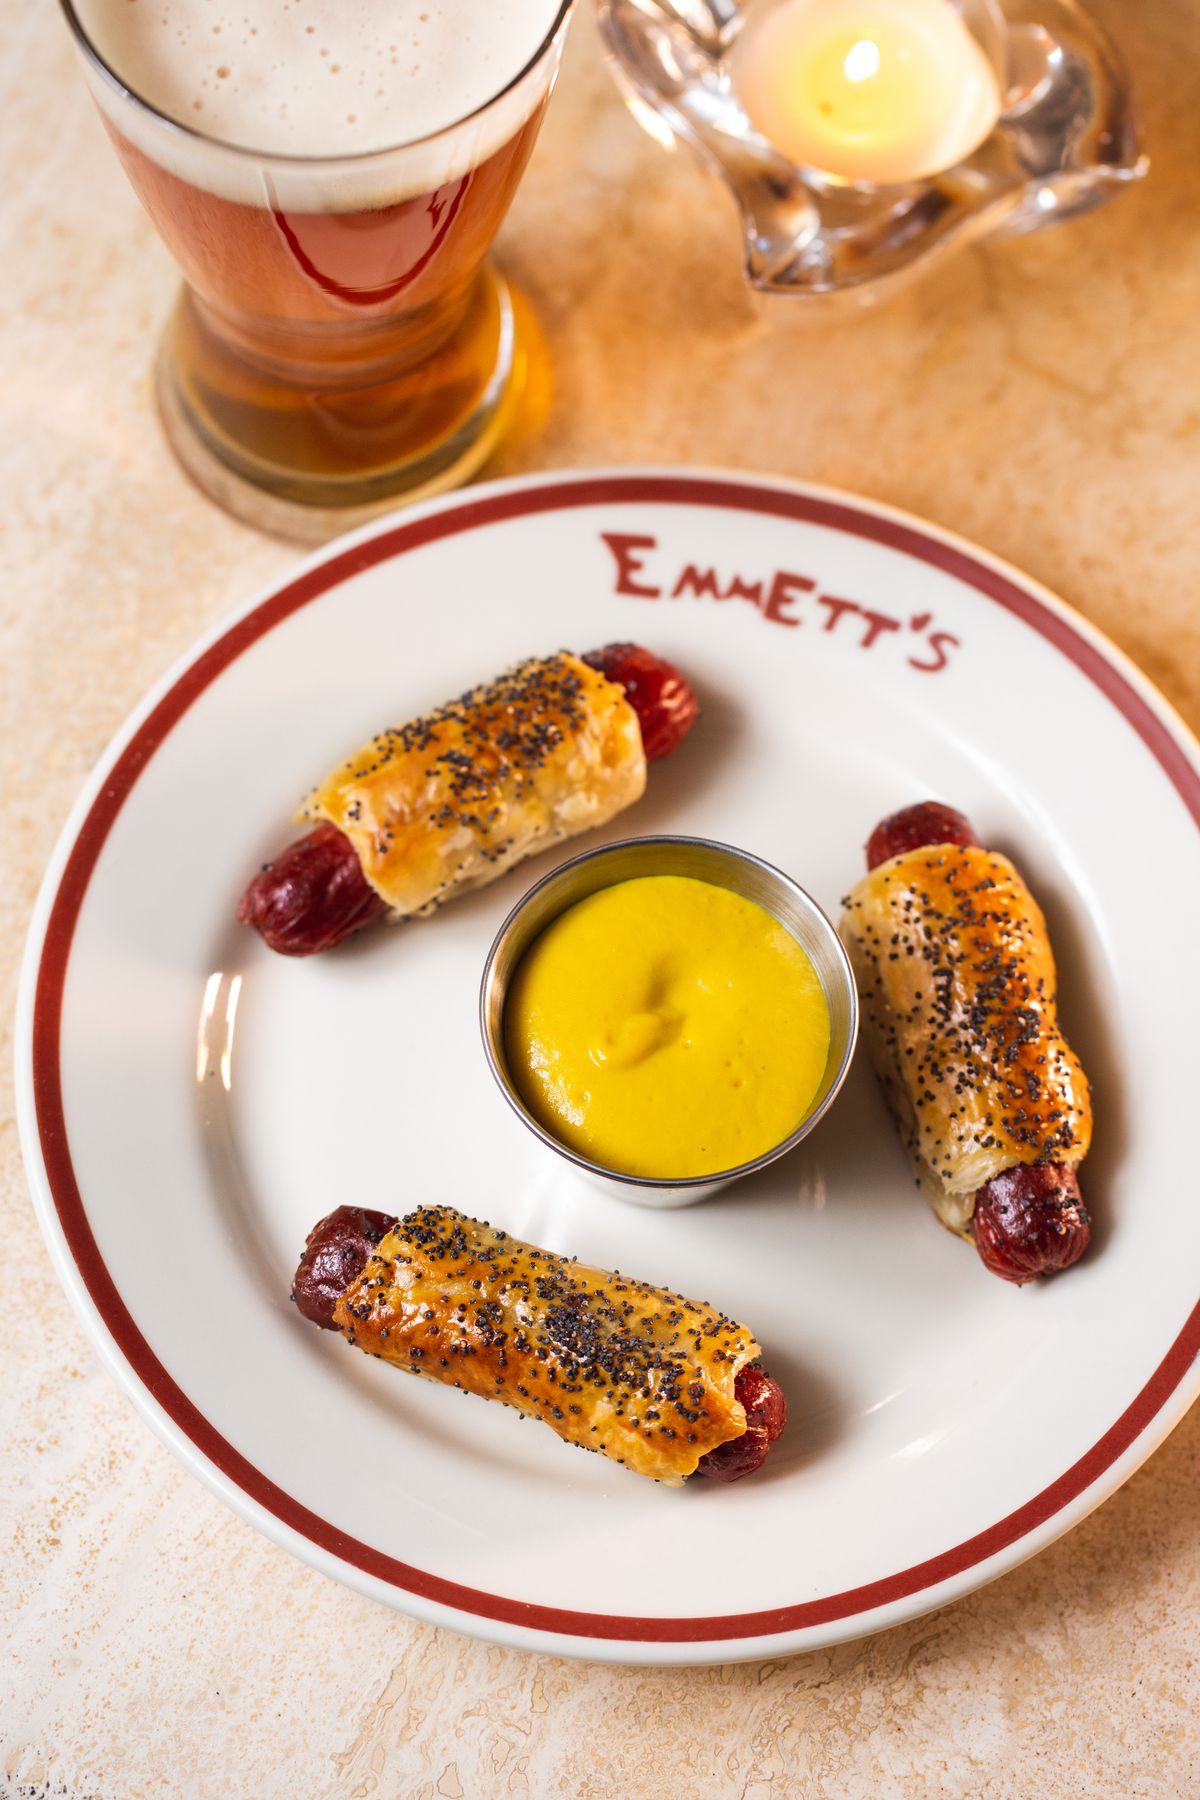 Pigs in a blanket at Emmett’s on Grove.